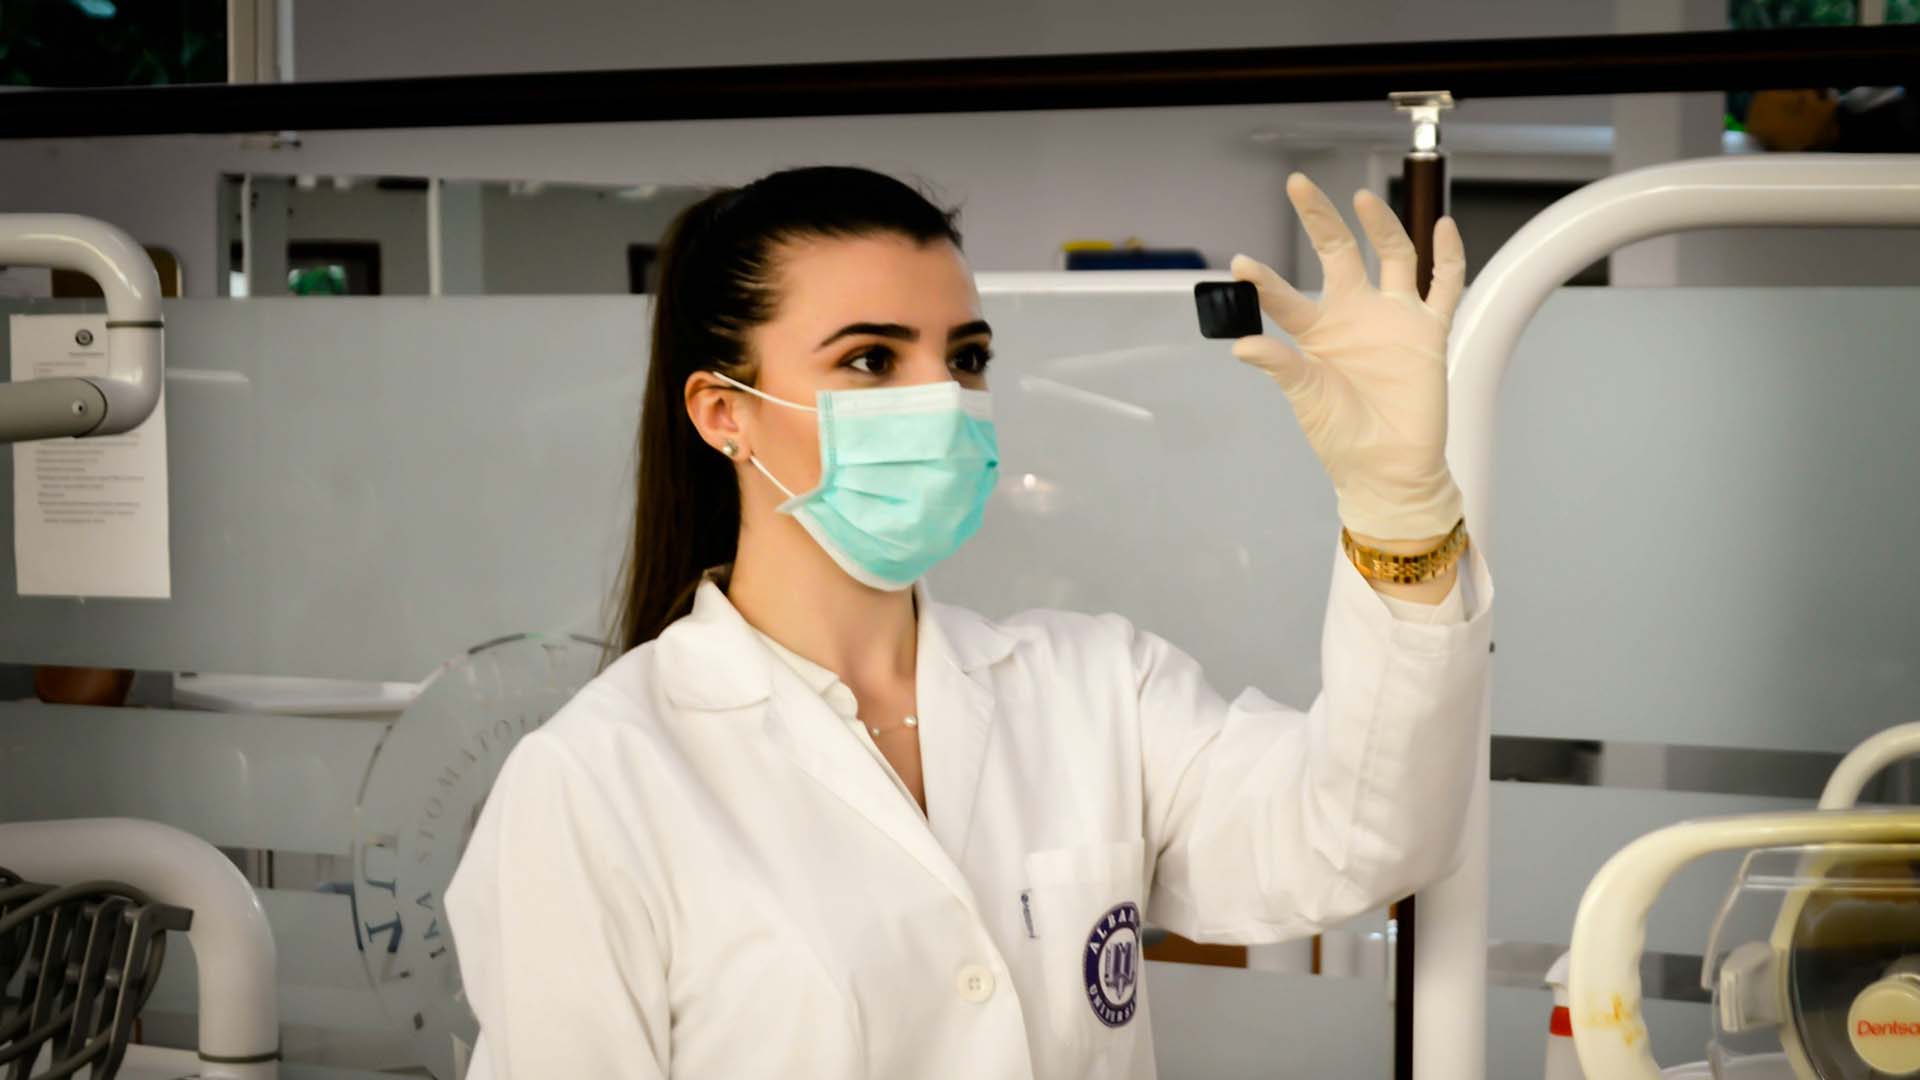 A dentist in lab coat and mask holds something up in front of her while wearing gloves.